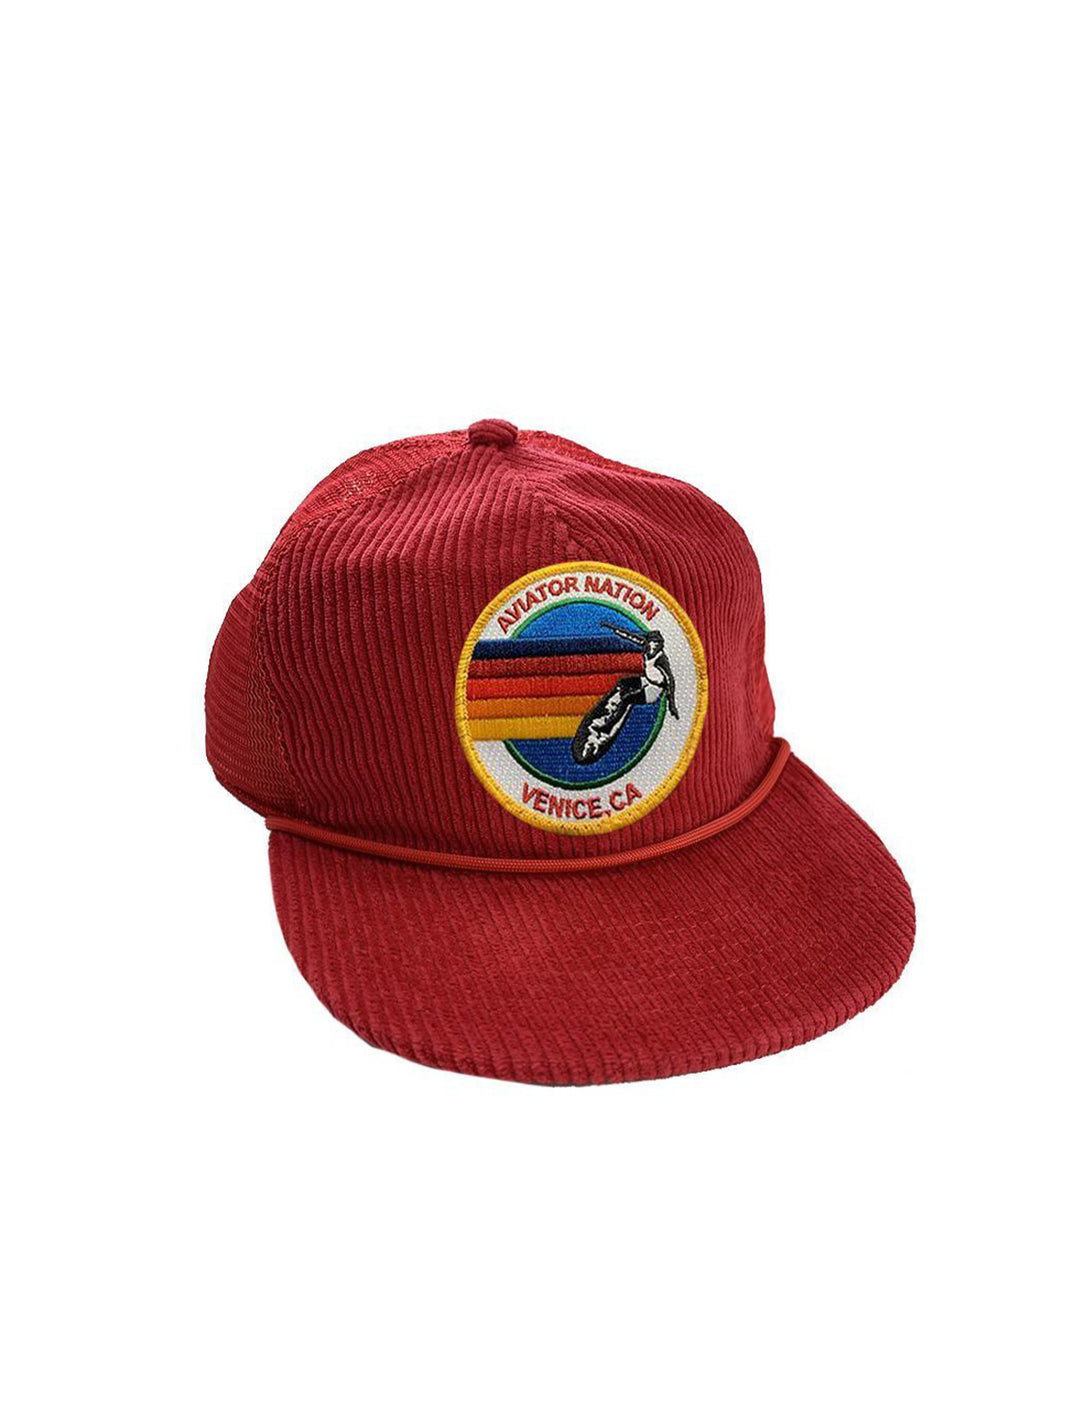 Front angle view of Aviator Nation's signature vintage corduroy mesh trucker hat in red.